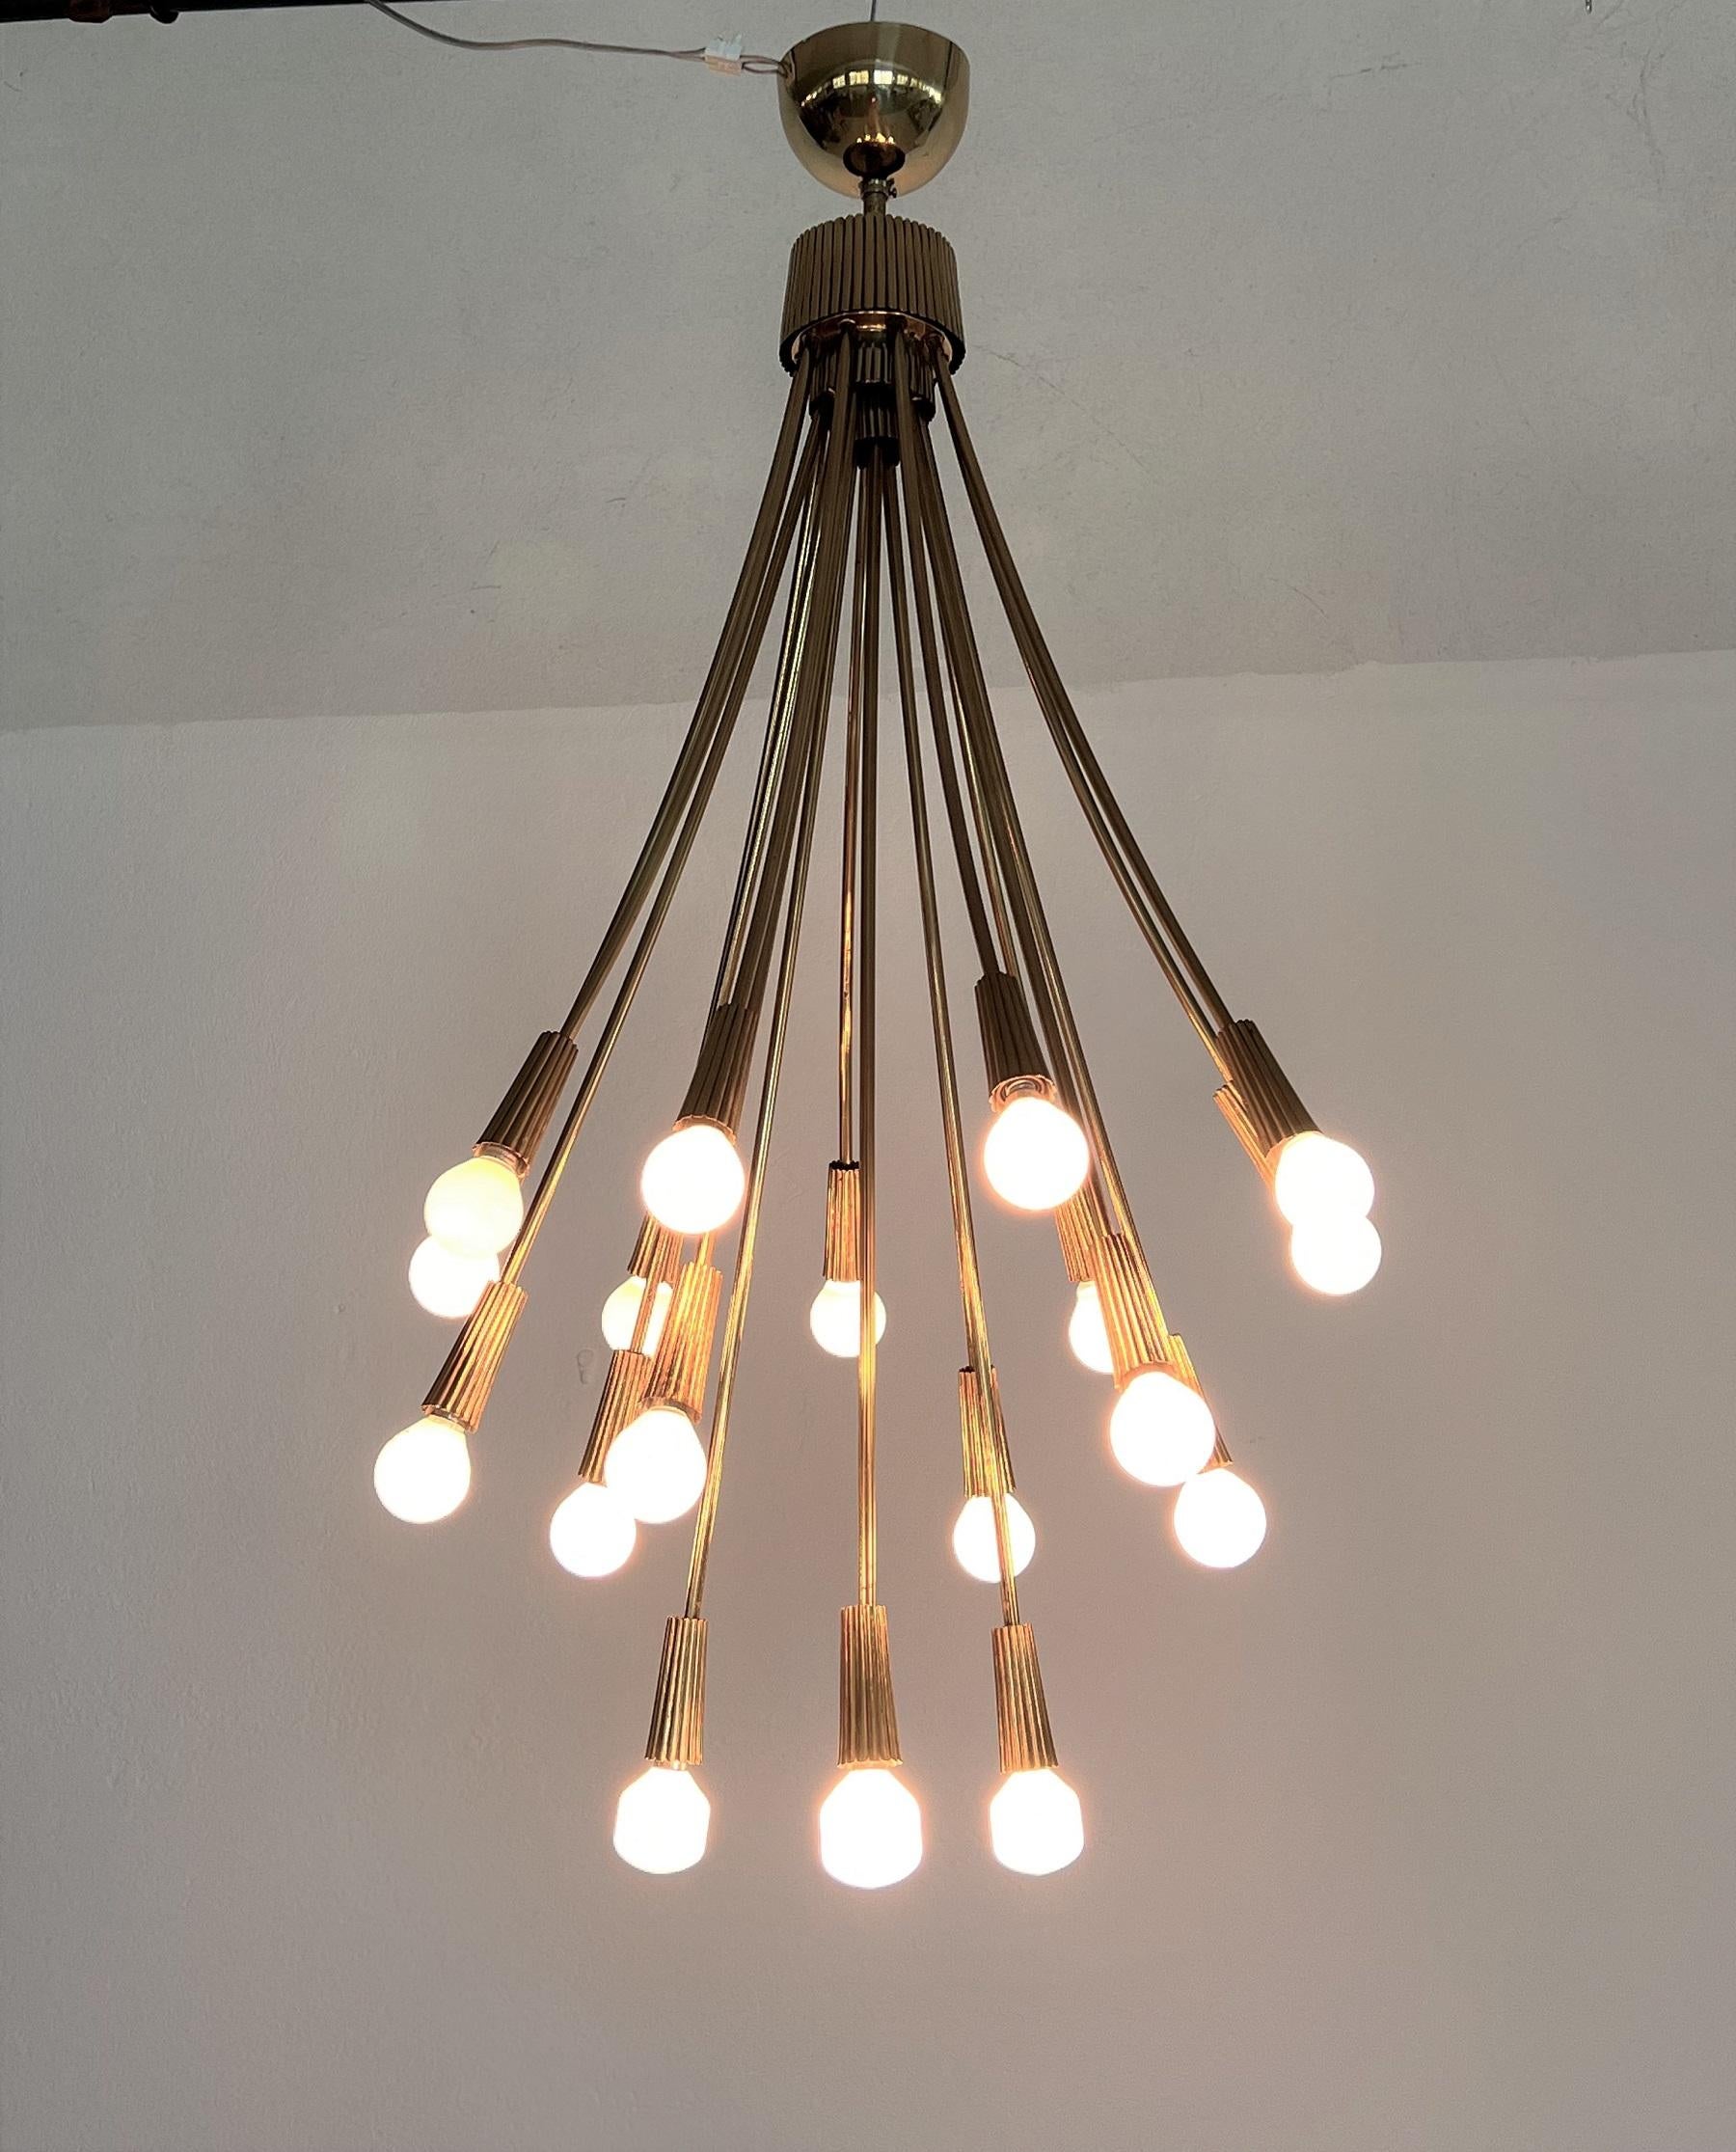 Mid-Century Modern Italian Chandelier in Brass with 18 Lights, 1970s For Sale